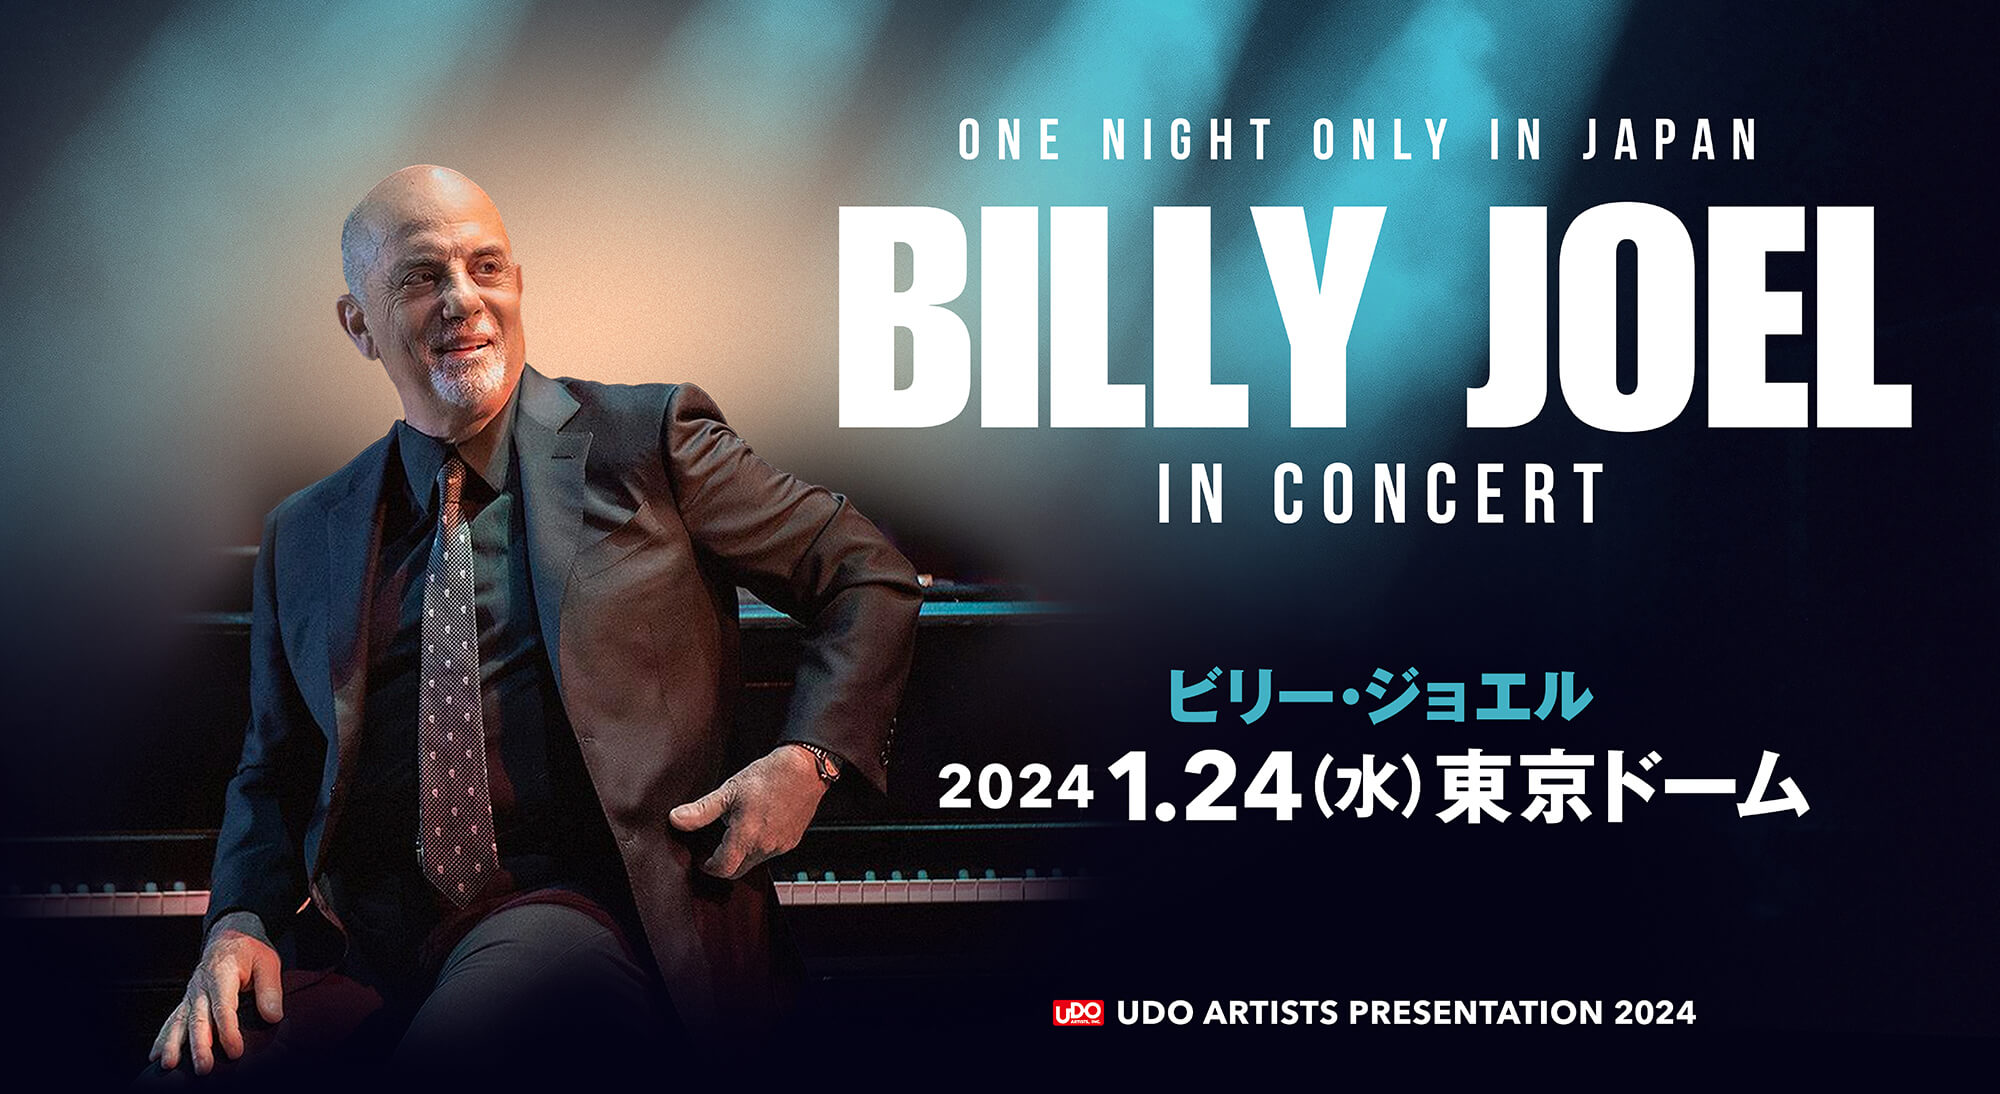 ONE NIGHT ONLY IN JAPAN BILLY JOEL IN CONCERT 2024.1.24（水）東京ドーム